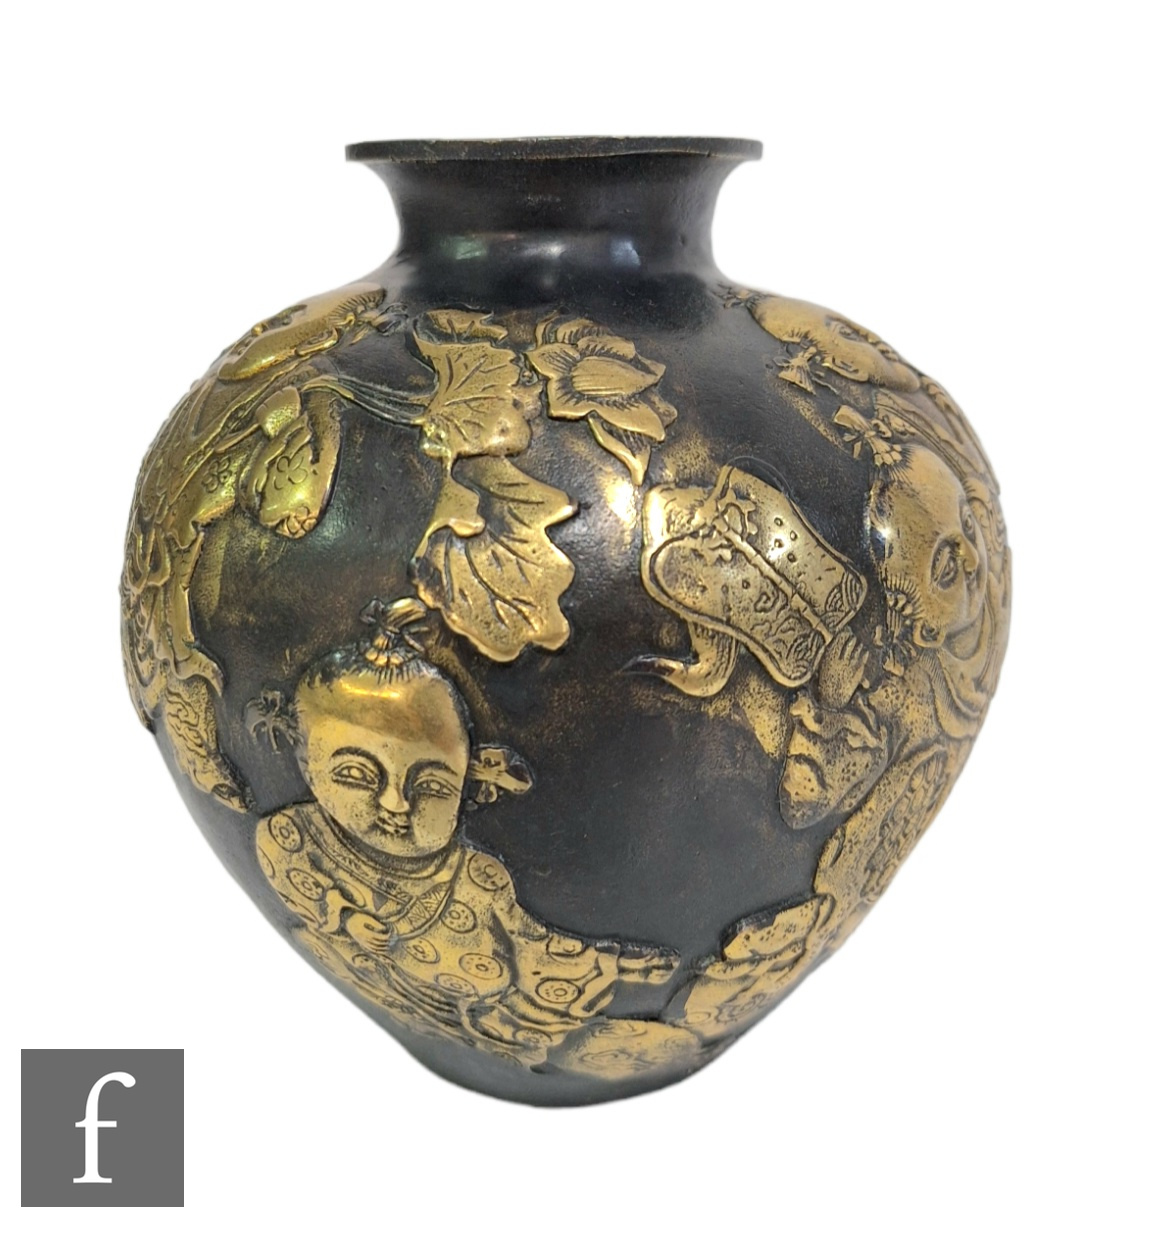 A Japanese Meiji period (1868-1912) ovoid form bronze vase, decorated with a series of relief